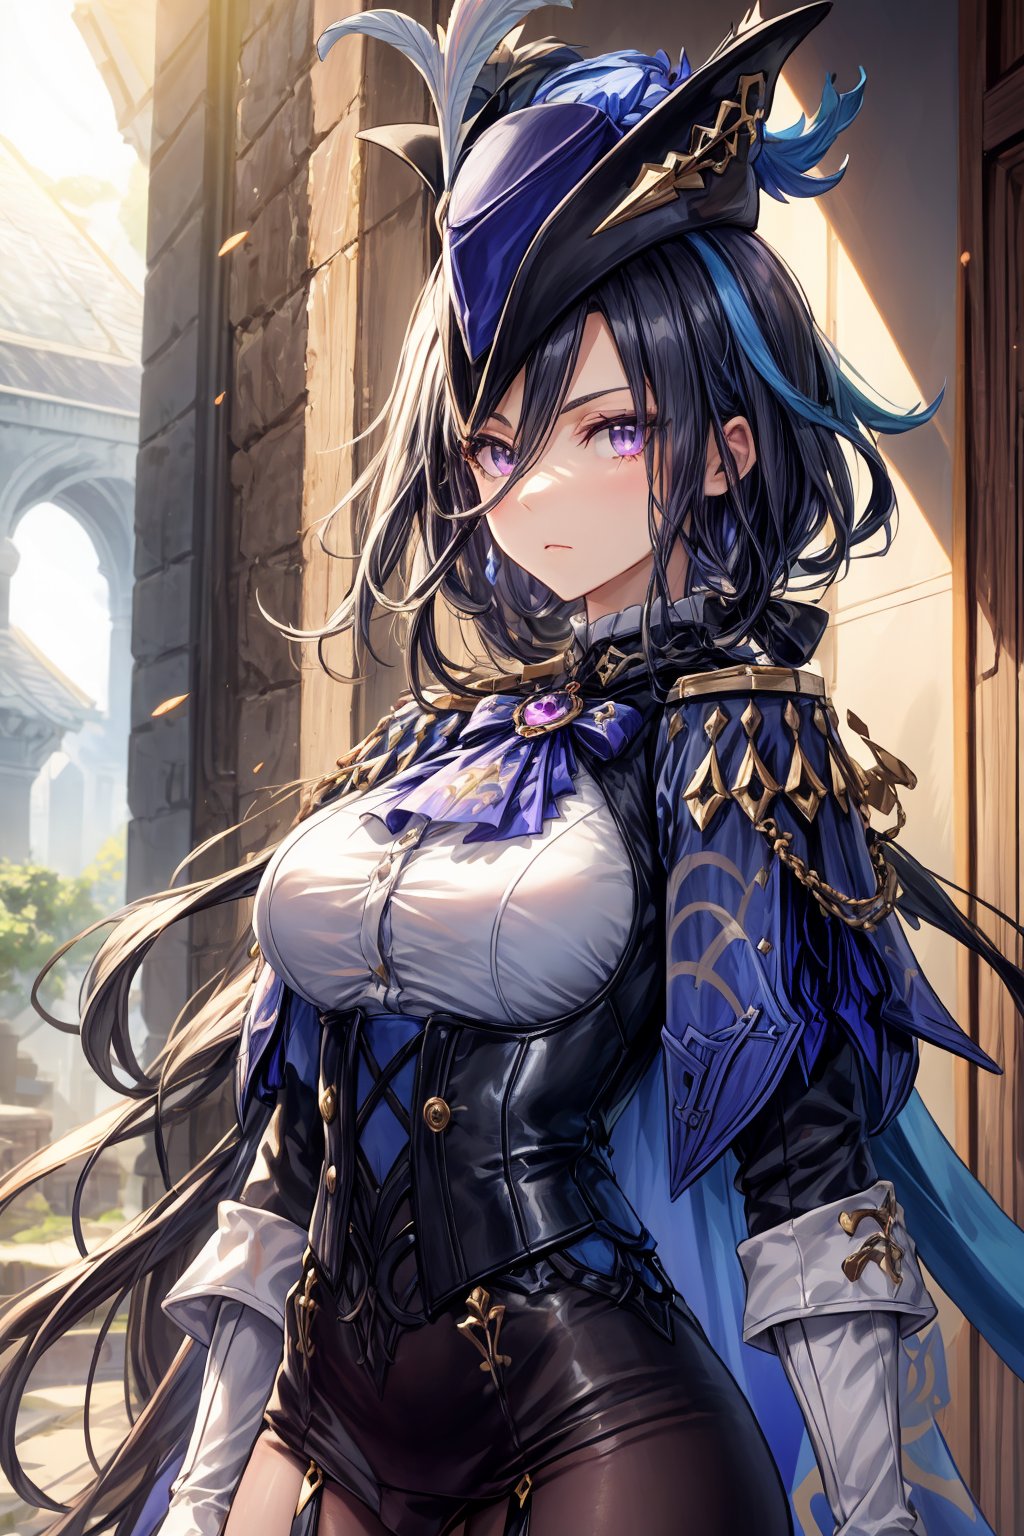 A mature Clorinde from Genshin Impact stands solo in a bright outdoor setting on a sunny day. She wears a striking outfit featuring white gloves, black pantyhose, and a black jacket with fold-over boots. A tricorne hat sits atop her deep blue hair, adorned with a hat feather. Her purple eyes gaze directly at the viewer, exuding a pensive atmosphere. A blue cape flows behind her, partially obscuring her large breasts covered by a corset. The simple background is illuminated by perfect light, accentuating her features and mysterious demeanor.,clorinde \(genshin impact\),clorinde_genshin_impact,clorinde (genshin impact)